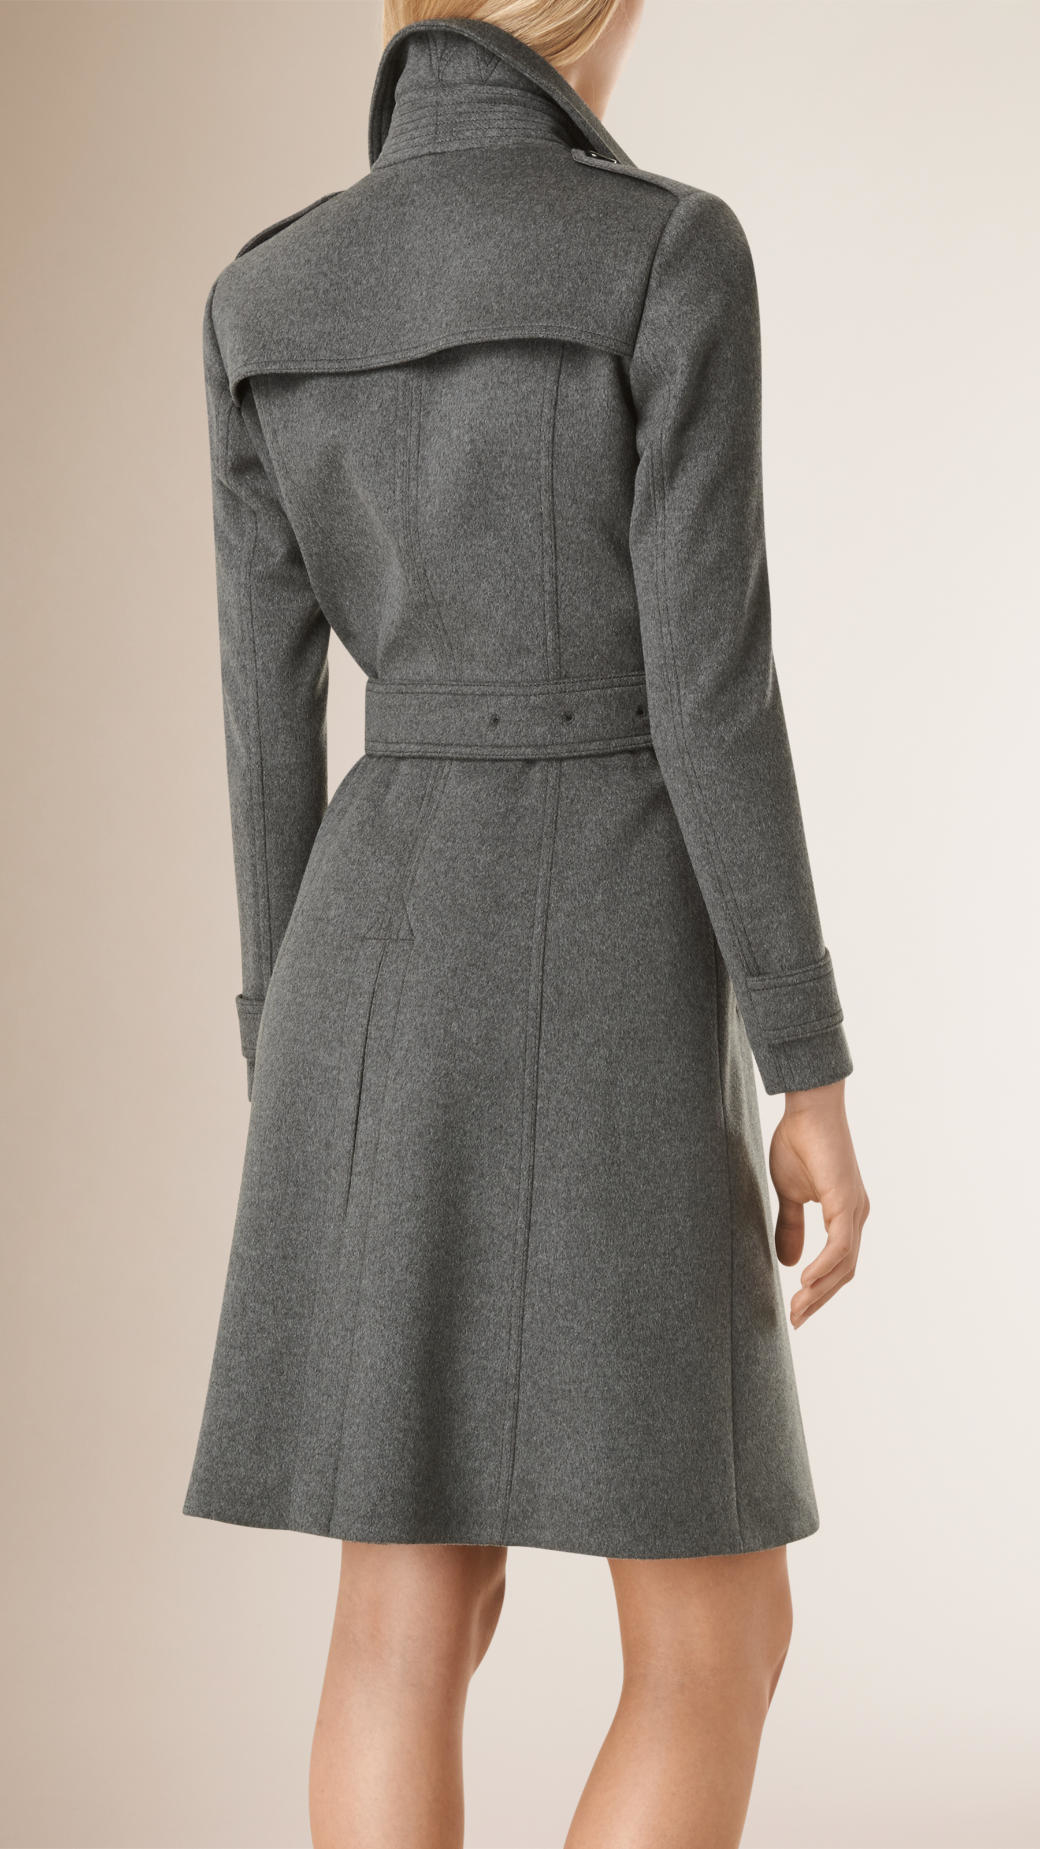 Burberry Skirted Wool Cashmere Coat in Gray - Lyst